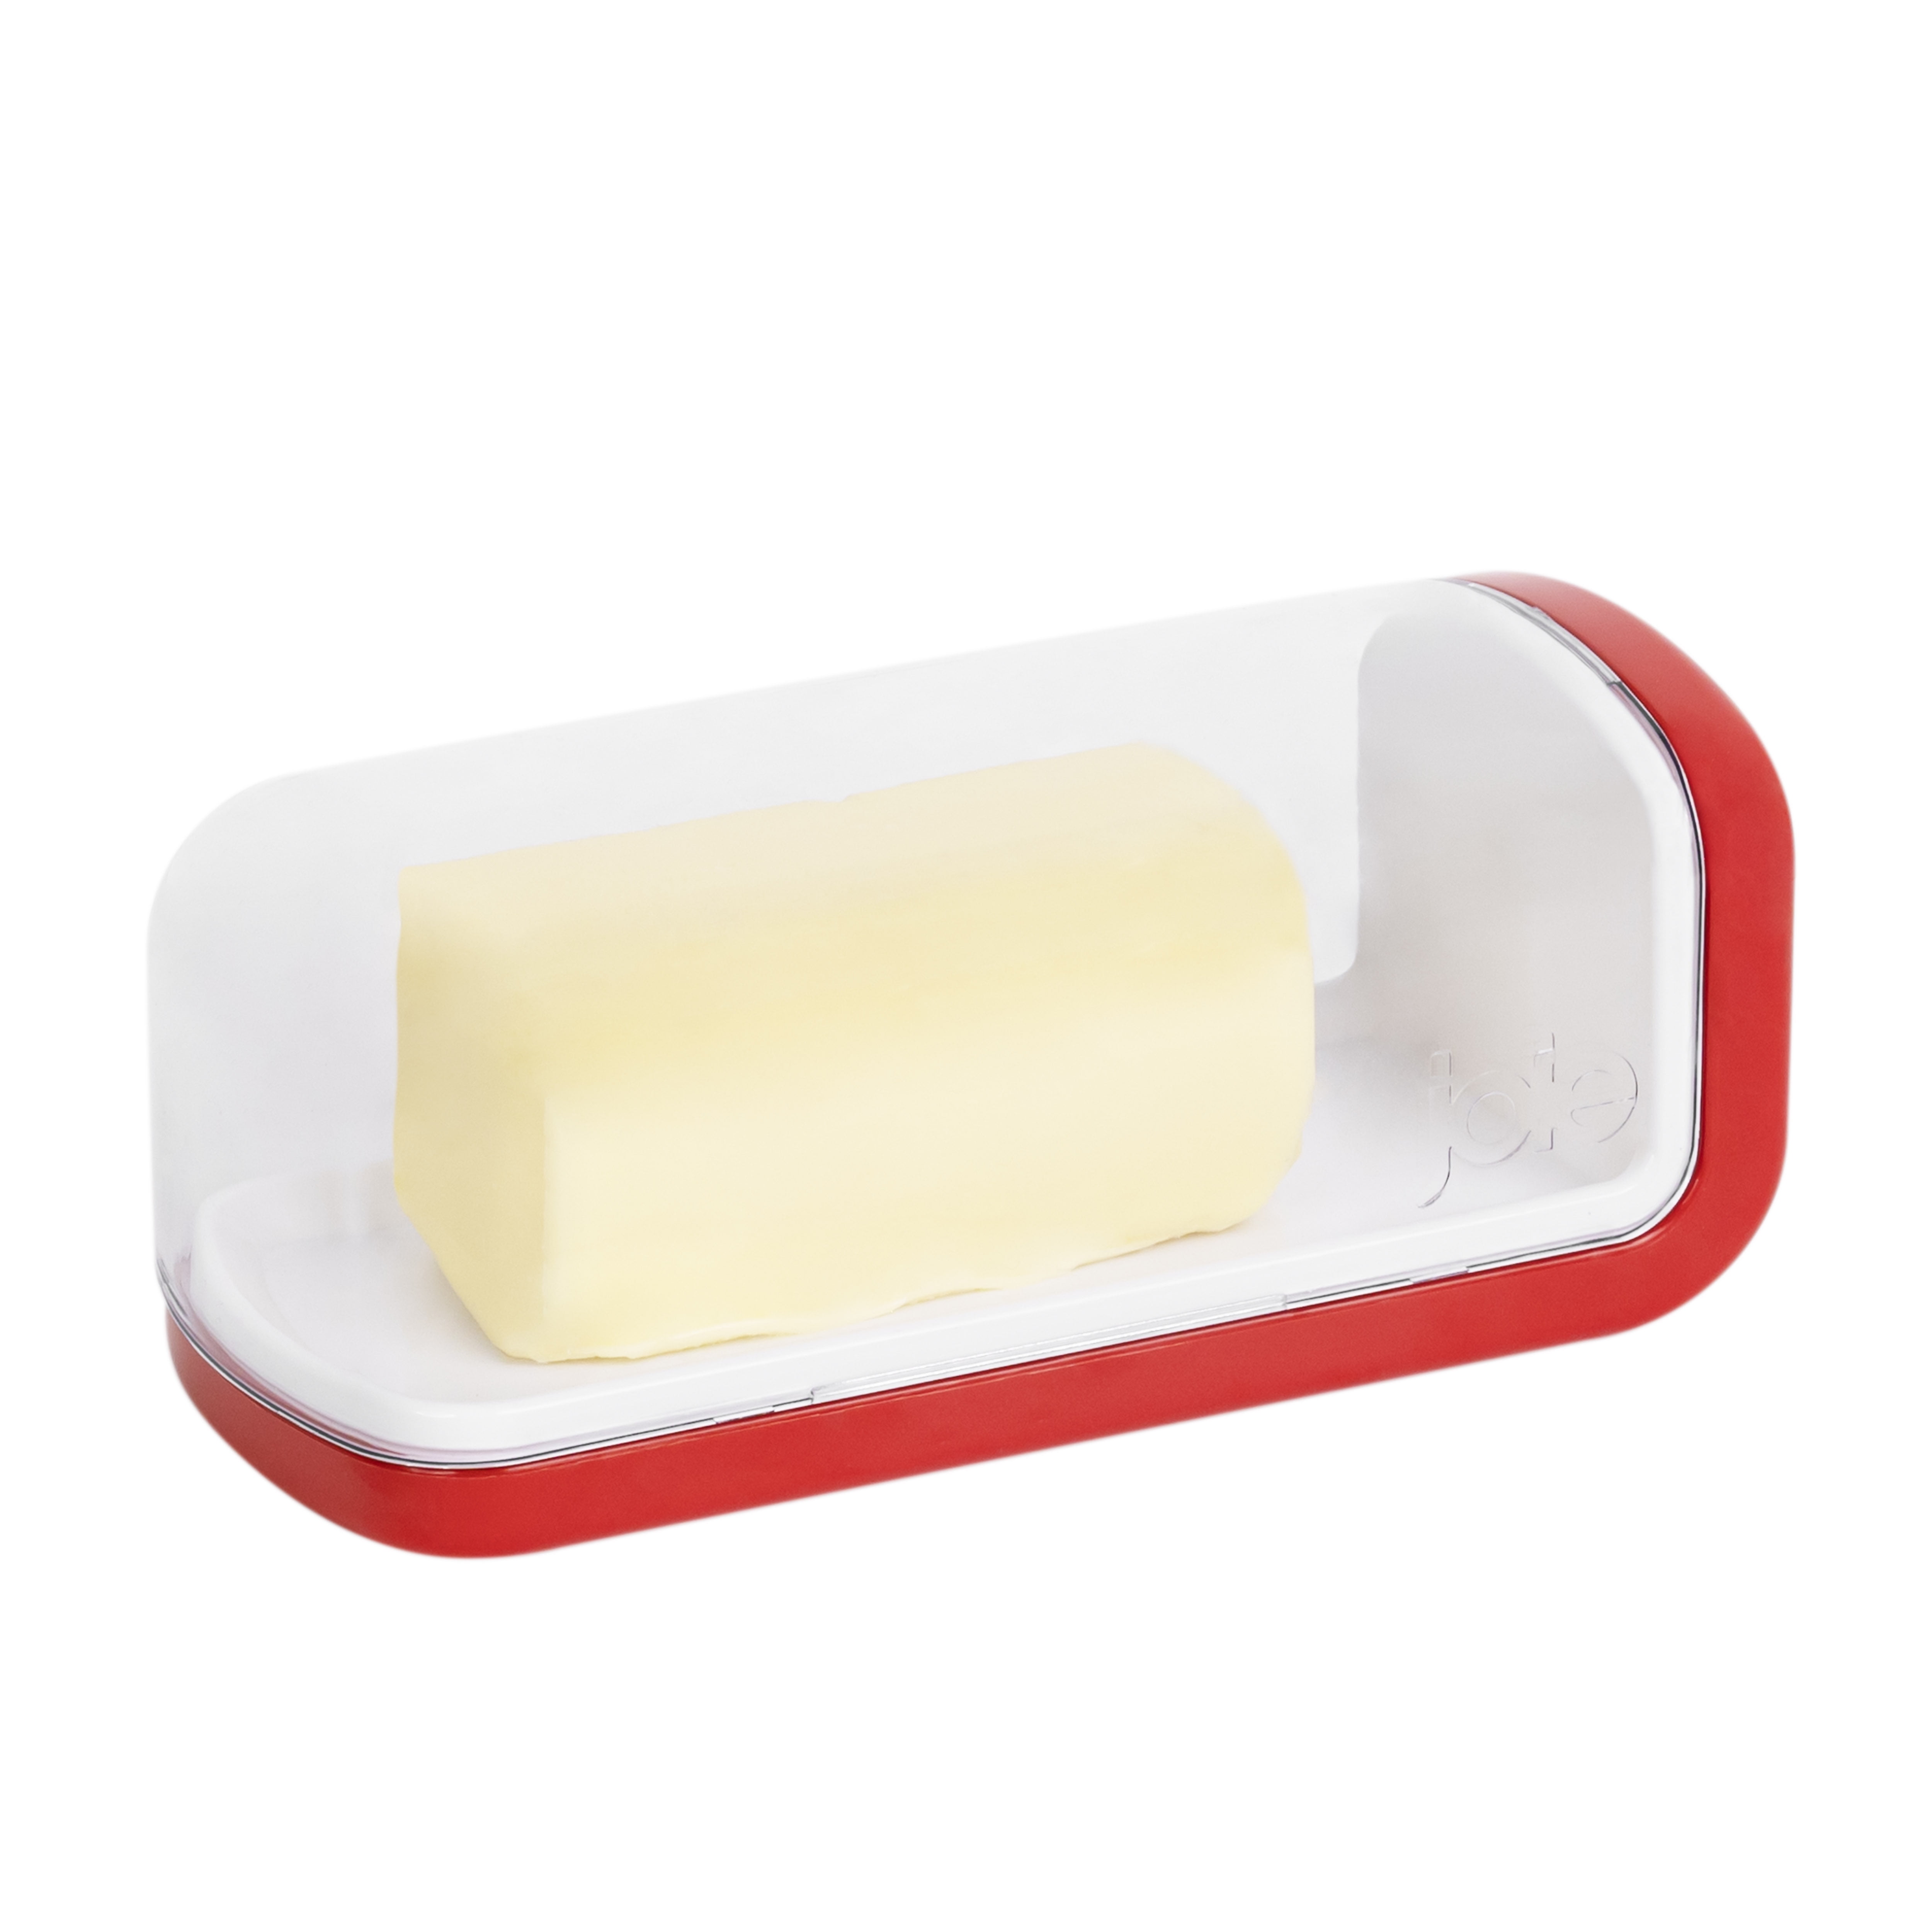 Joie Red Stick Butter Dish, Evri